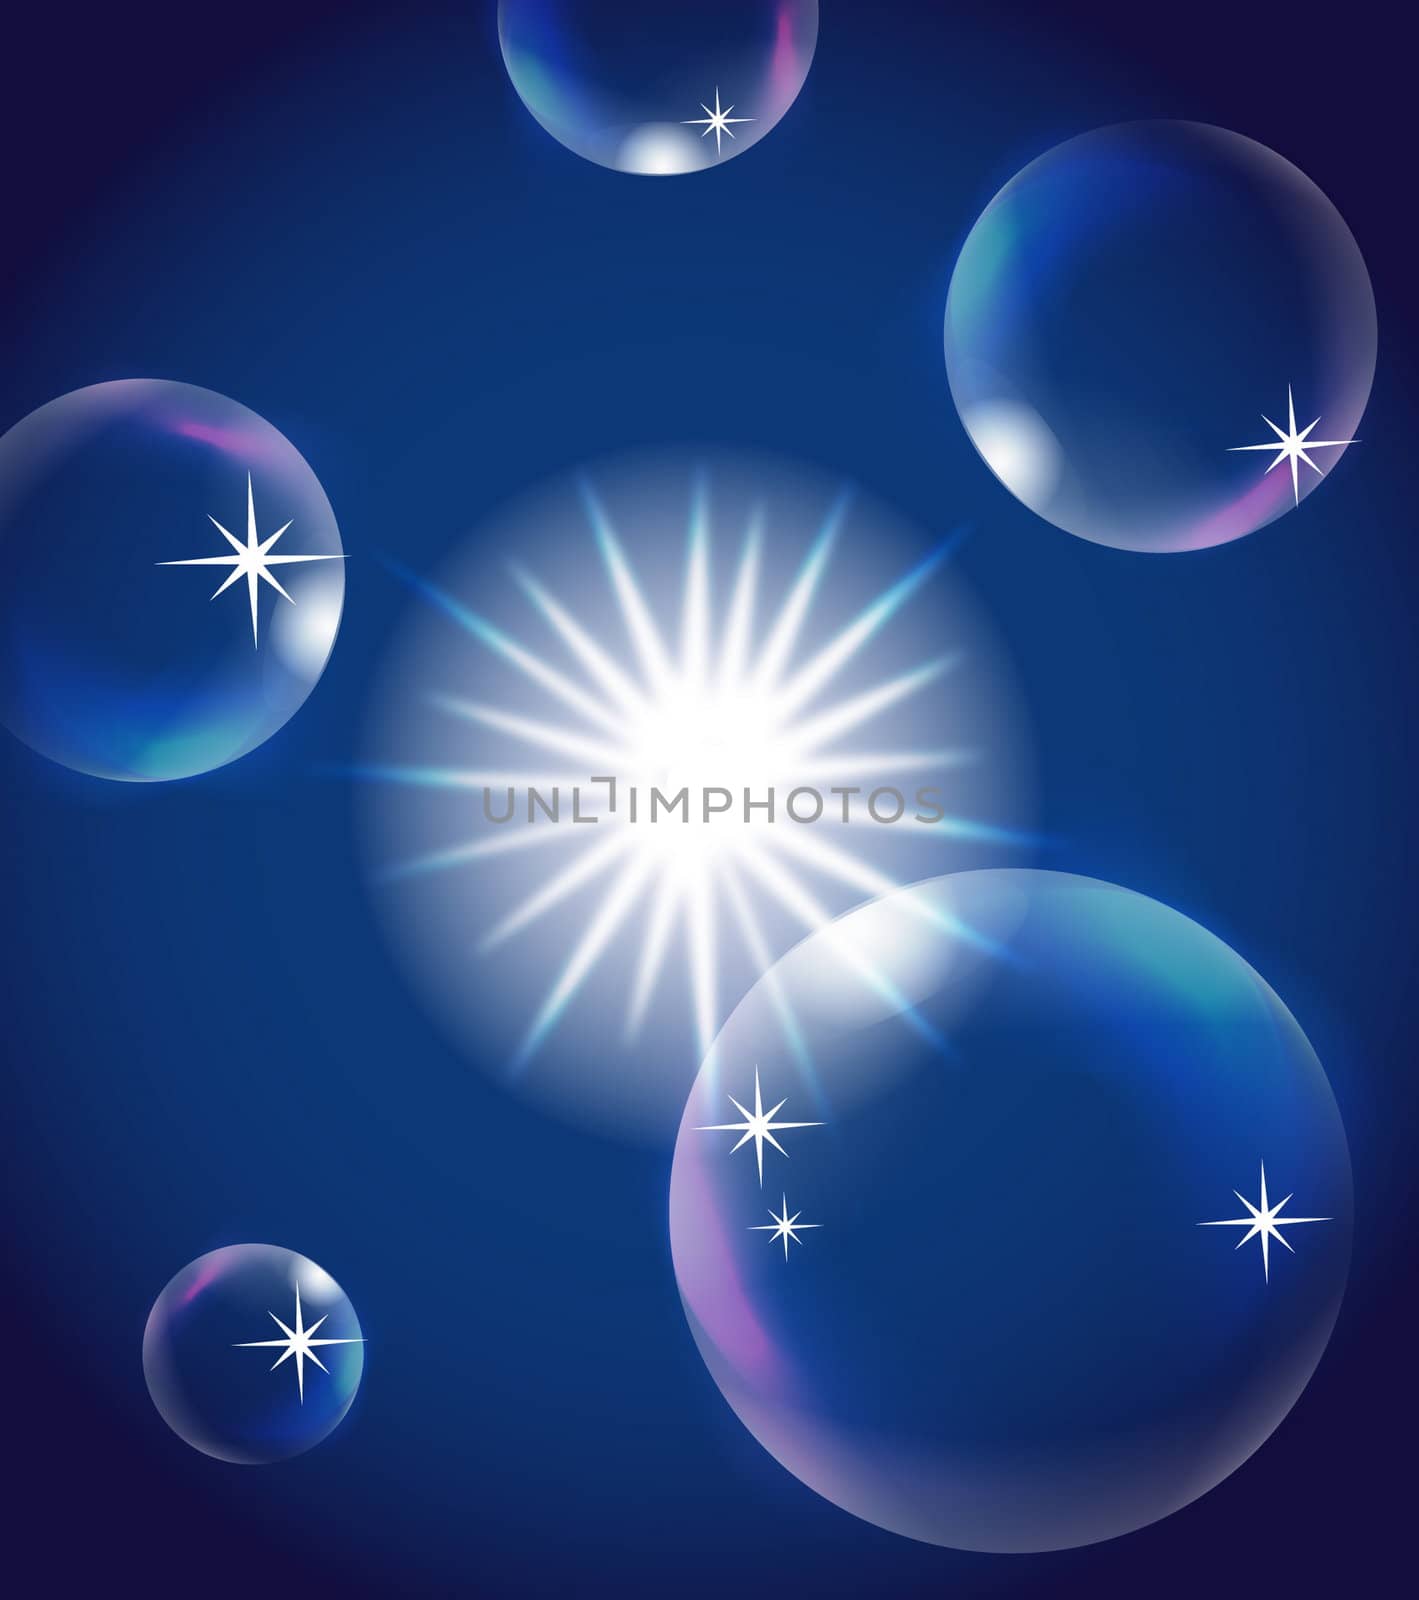 sun in blue sky with bubbles, illustration